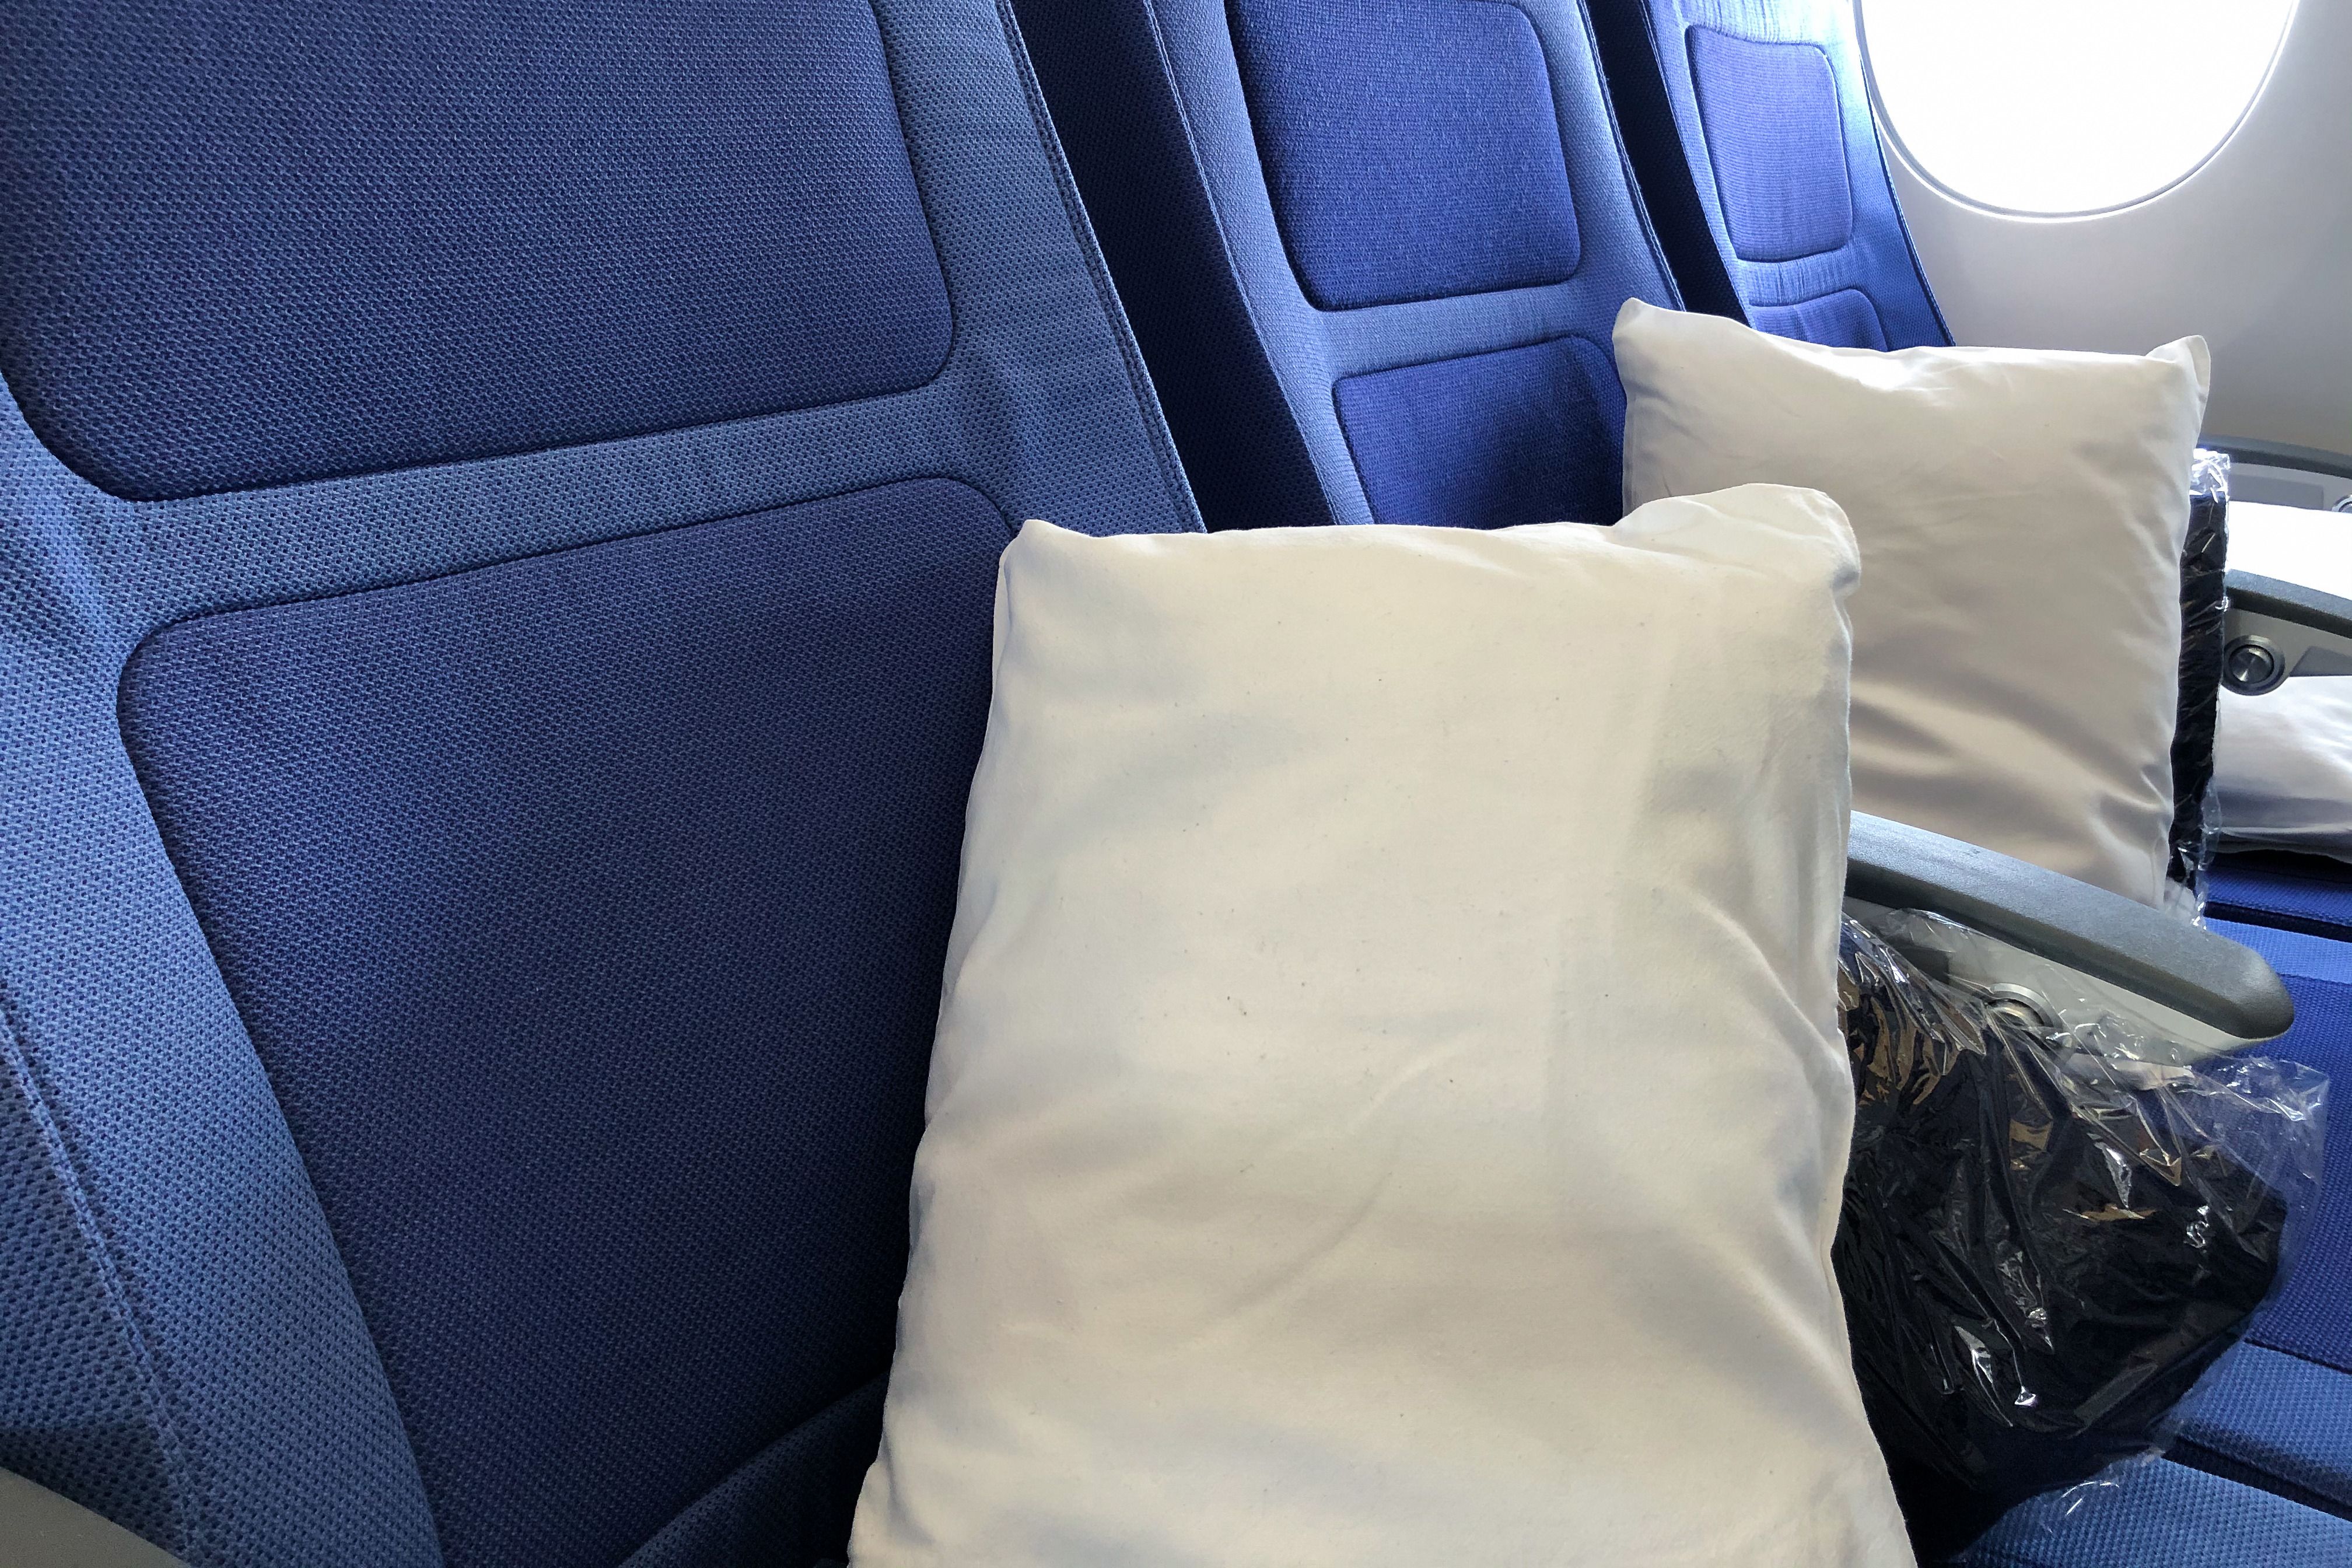 Wrapped blankets and pillows placed on a couple of aircraft seats.